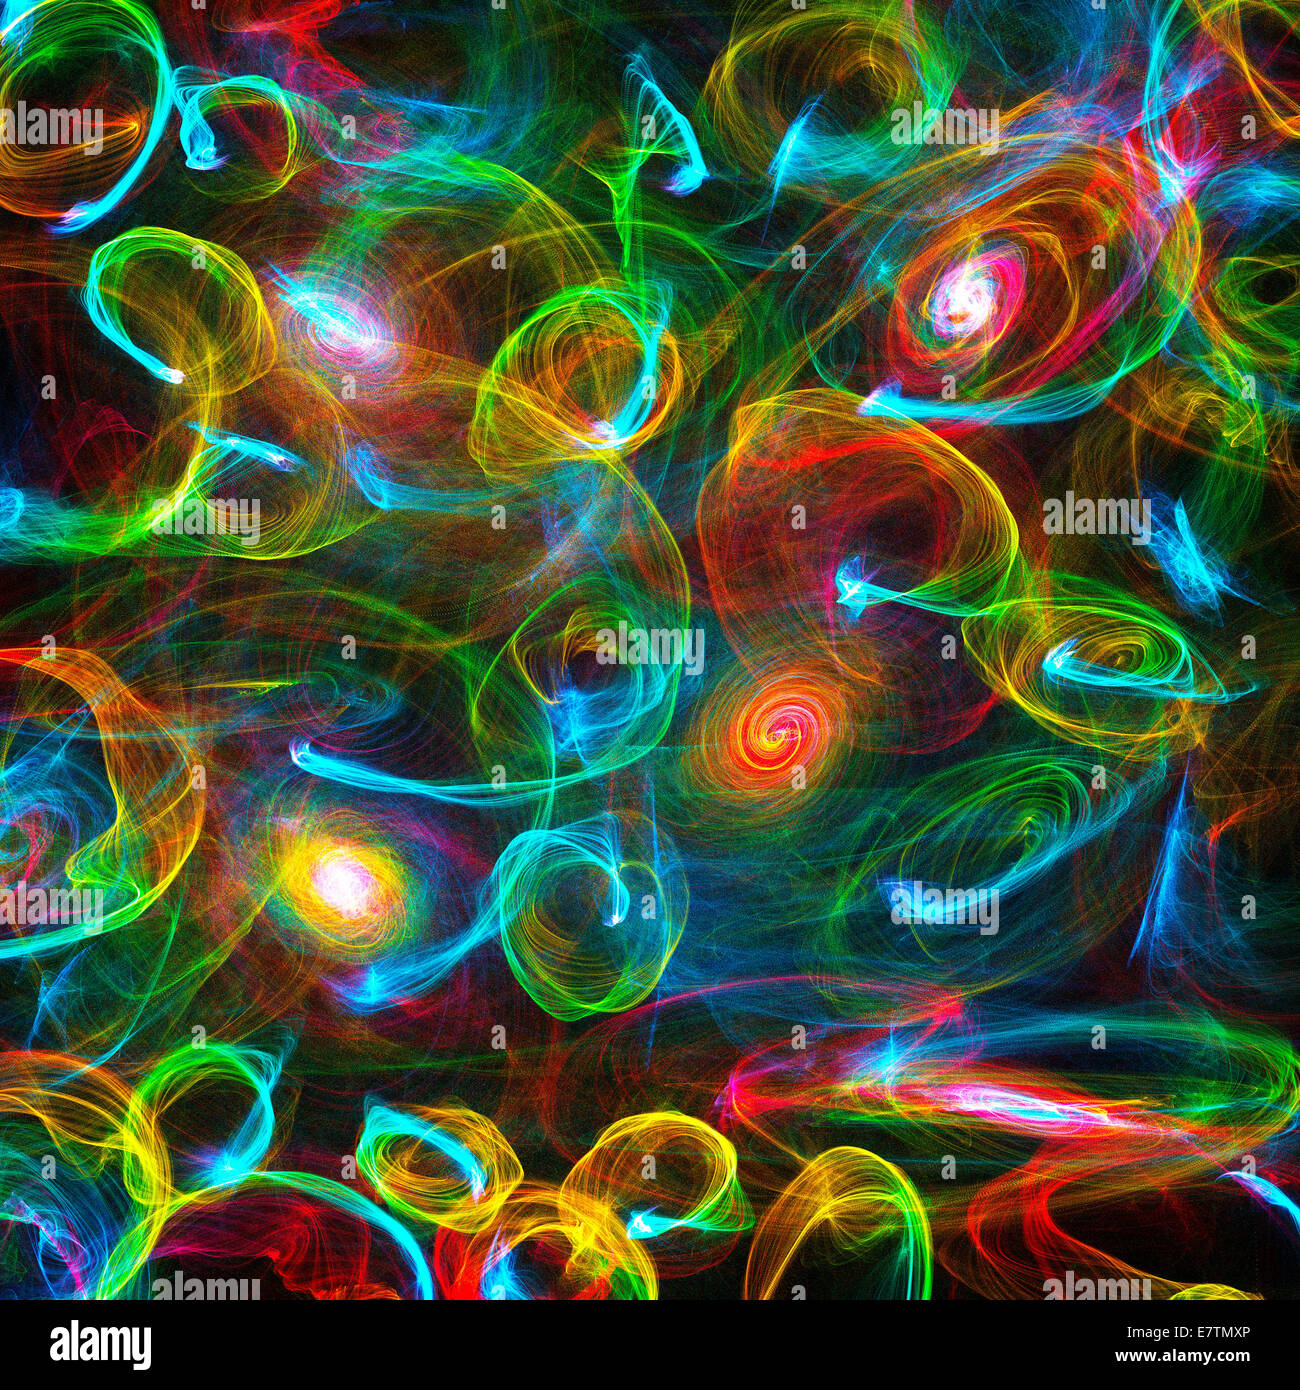 Multicoloured abstract patterns against black background, computer artwork. Stock Photo